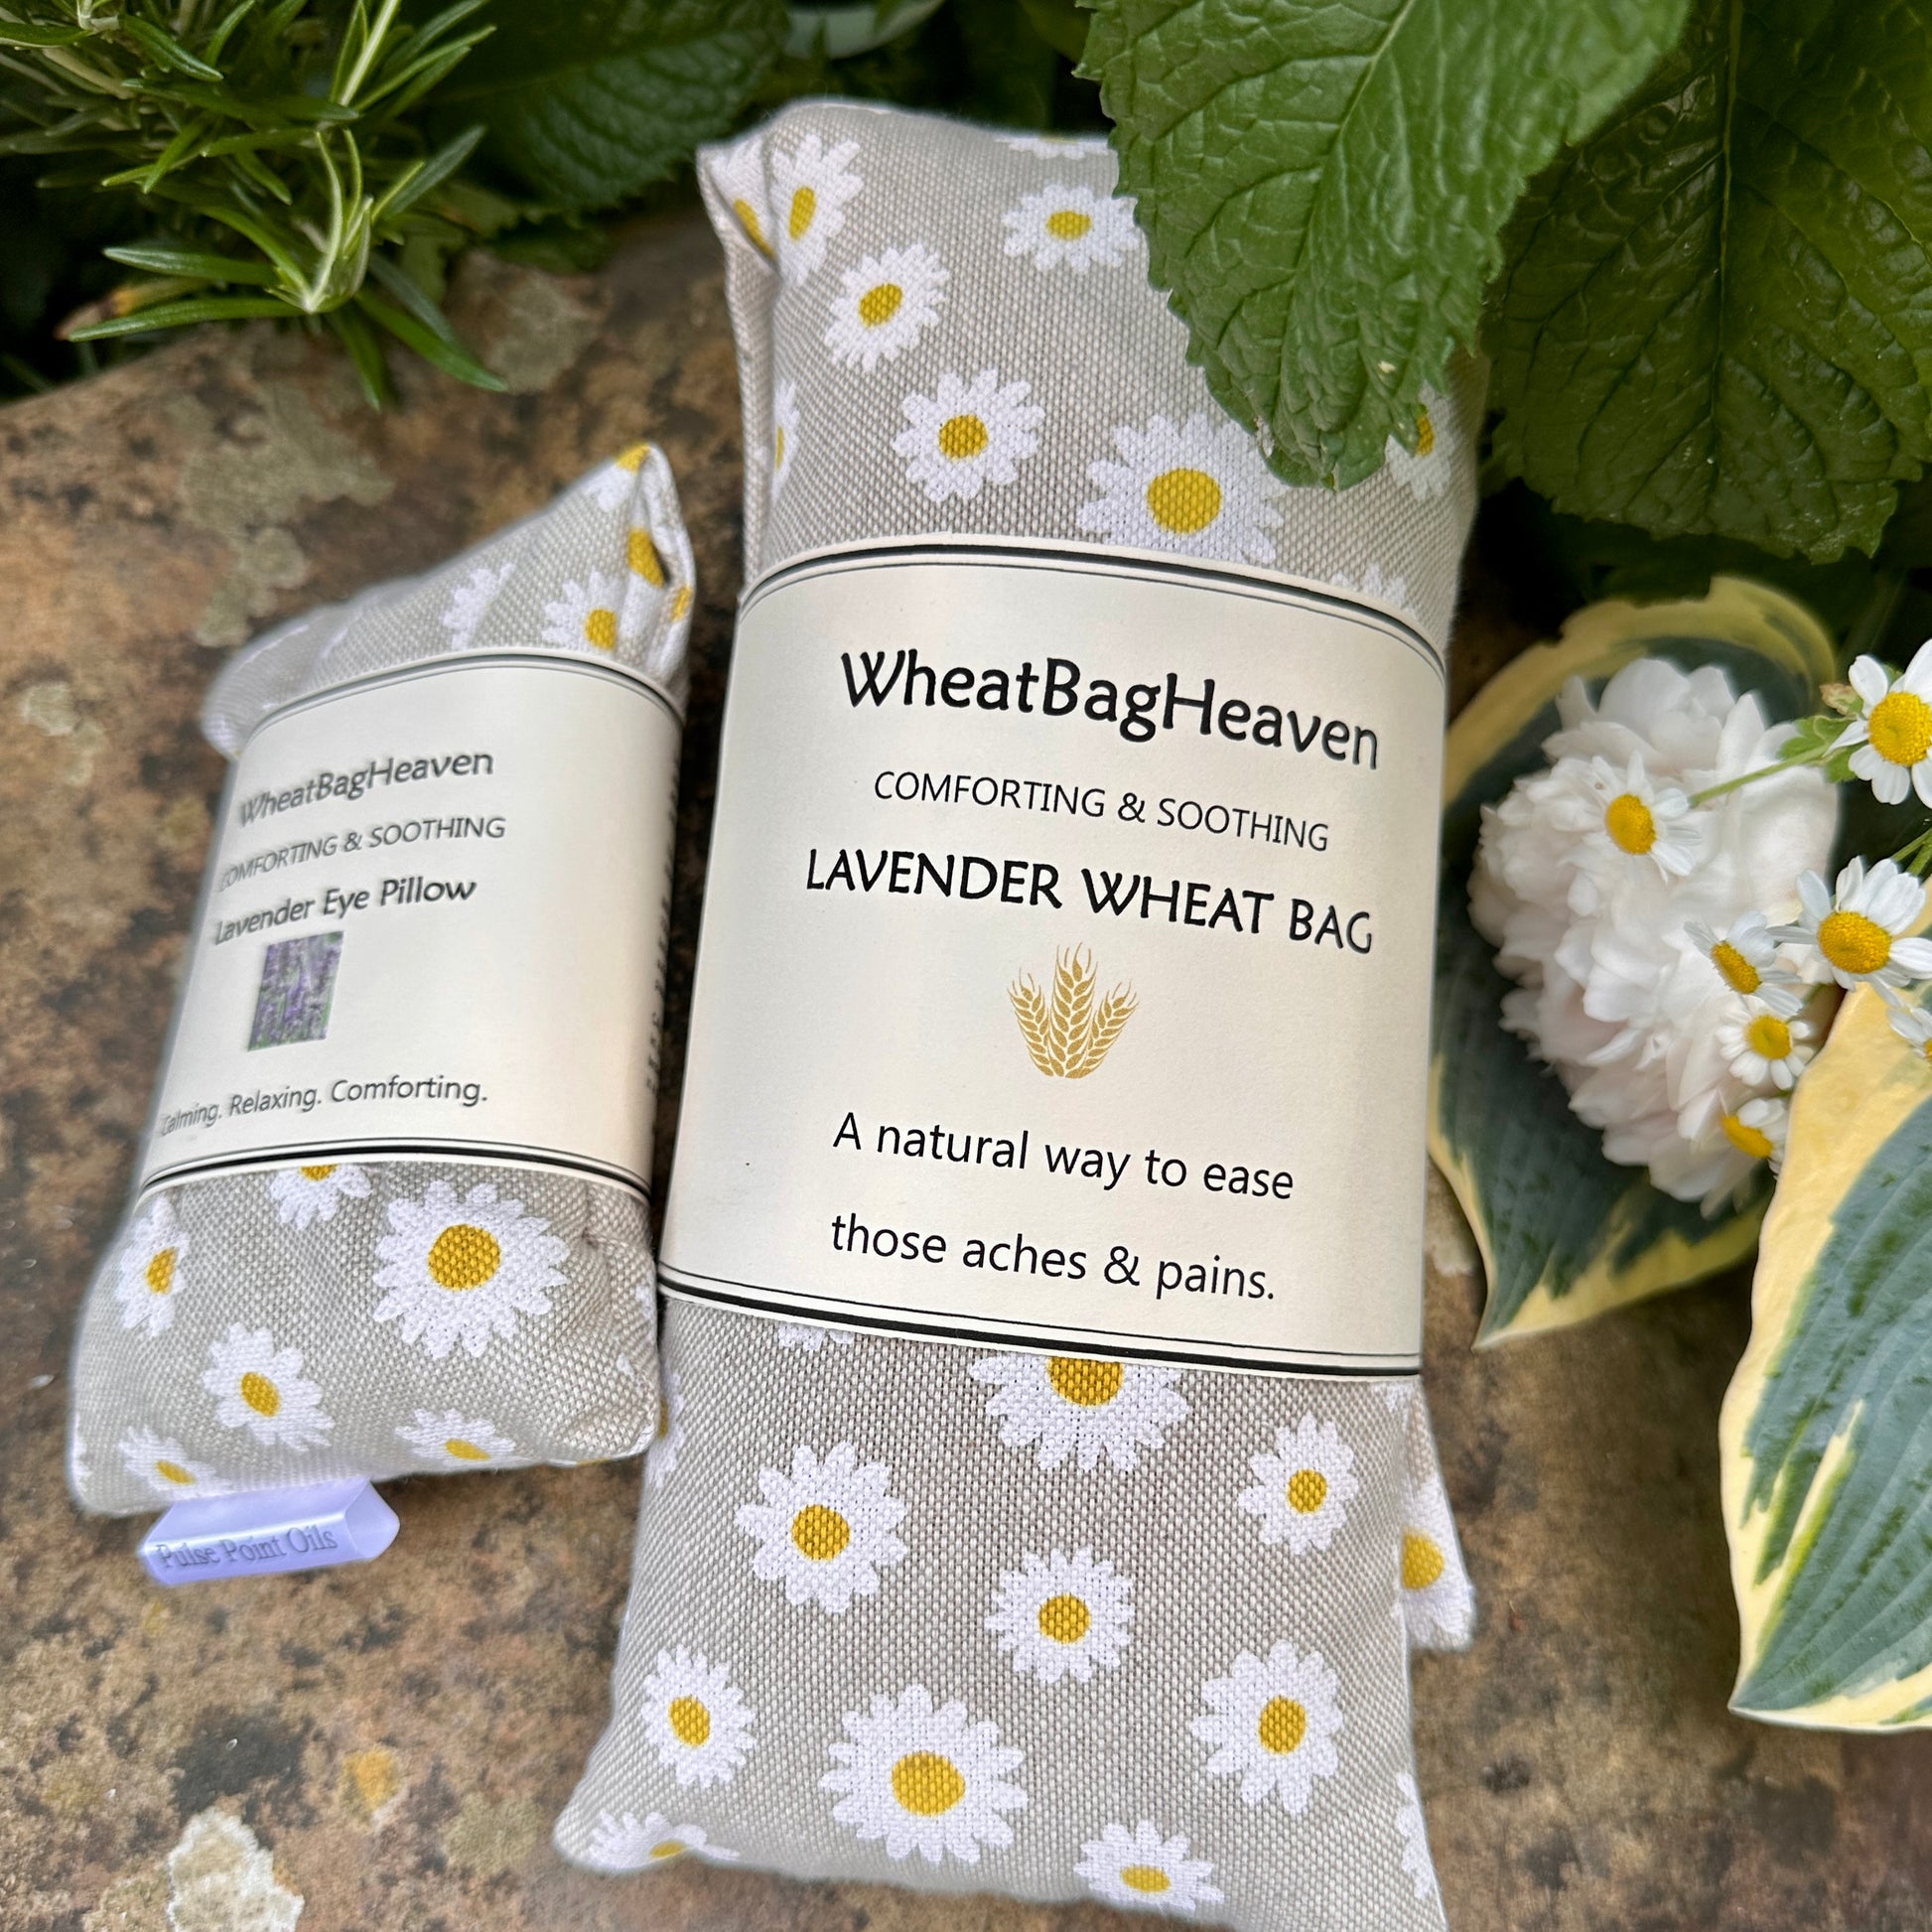 Lavender scented long cotton wheat bag with a matching eye pillow to soothe and comfort, surrounded by rosemary, mint, daisies, hostas in the garden of WheatBagHeaven 